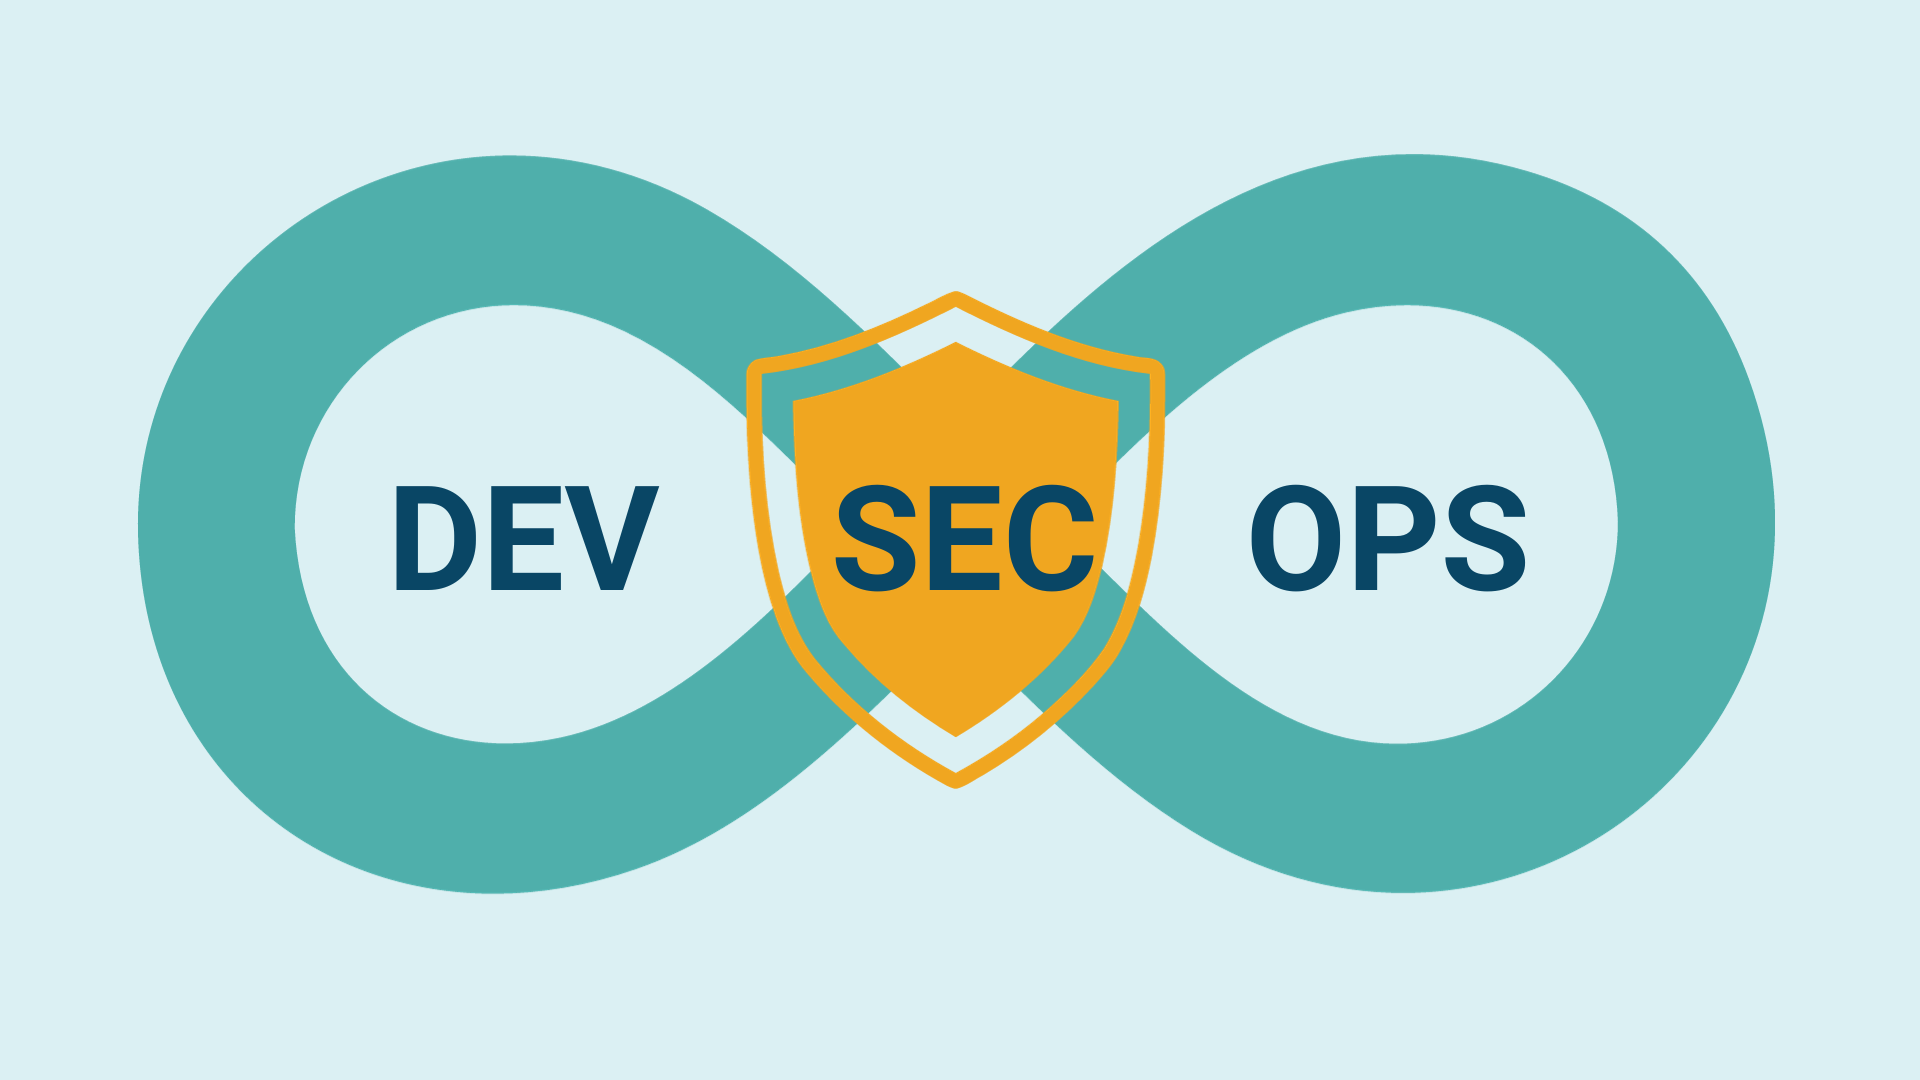 DevSecOps integrates security aspects into traditional DevOps